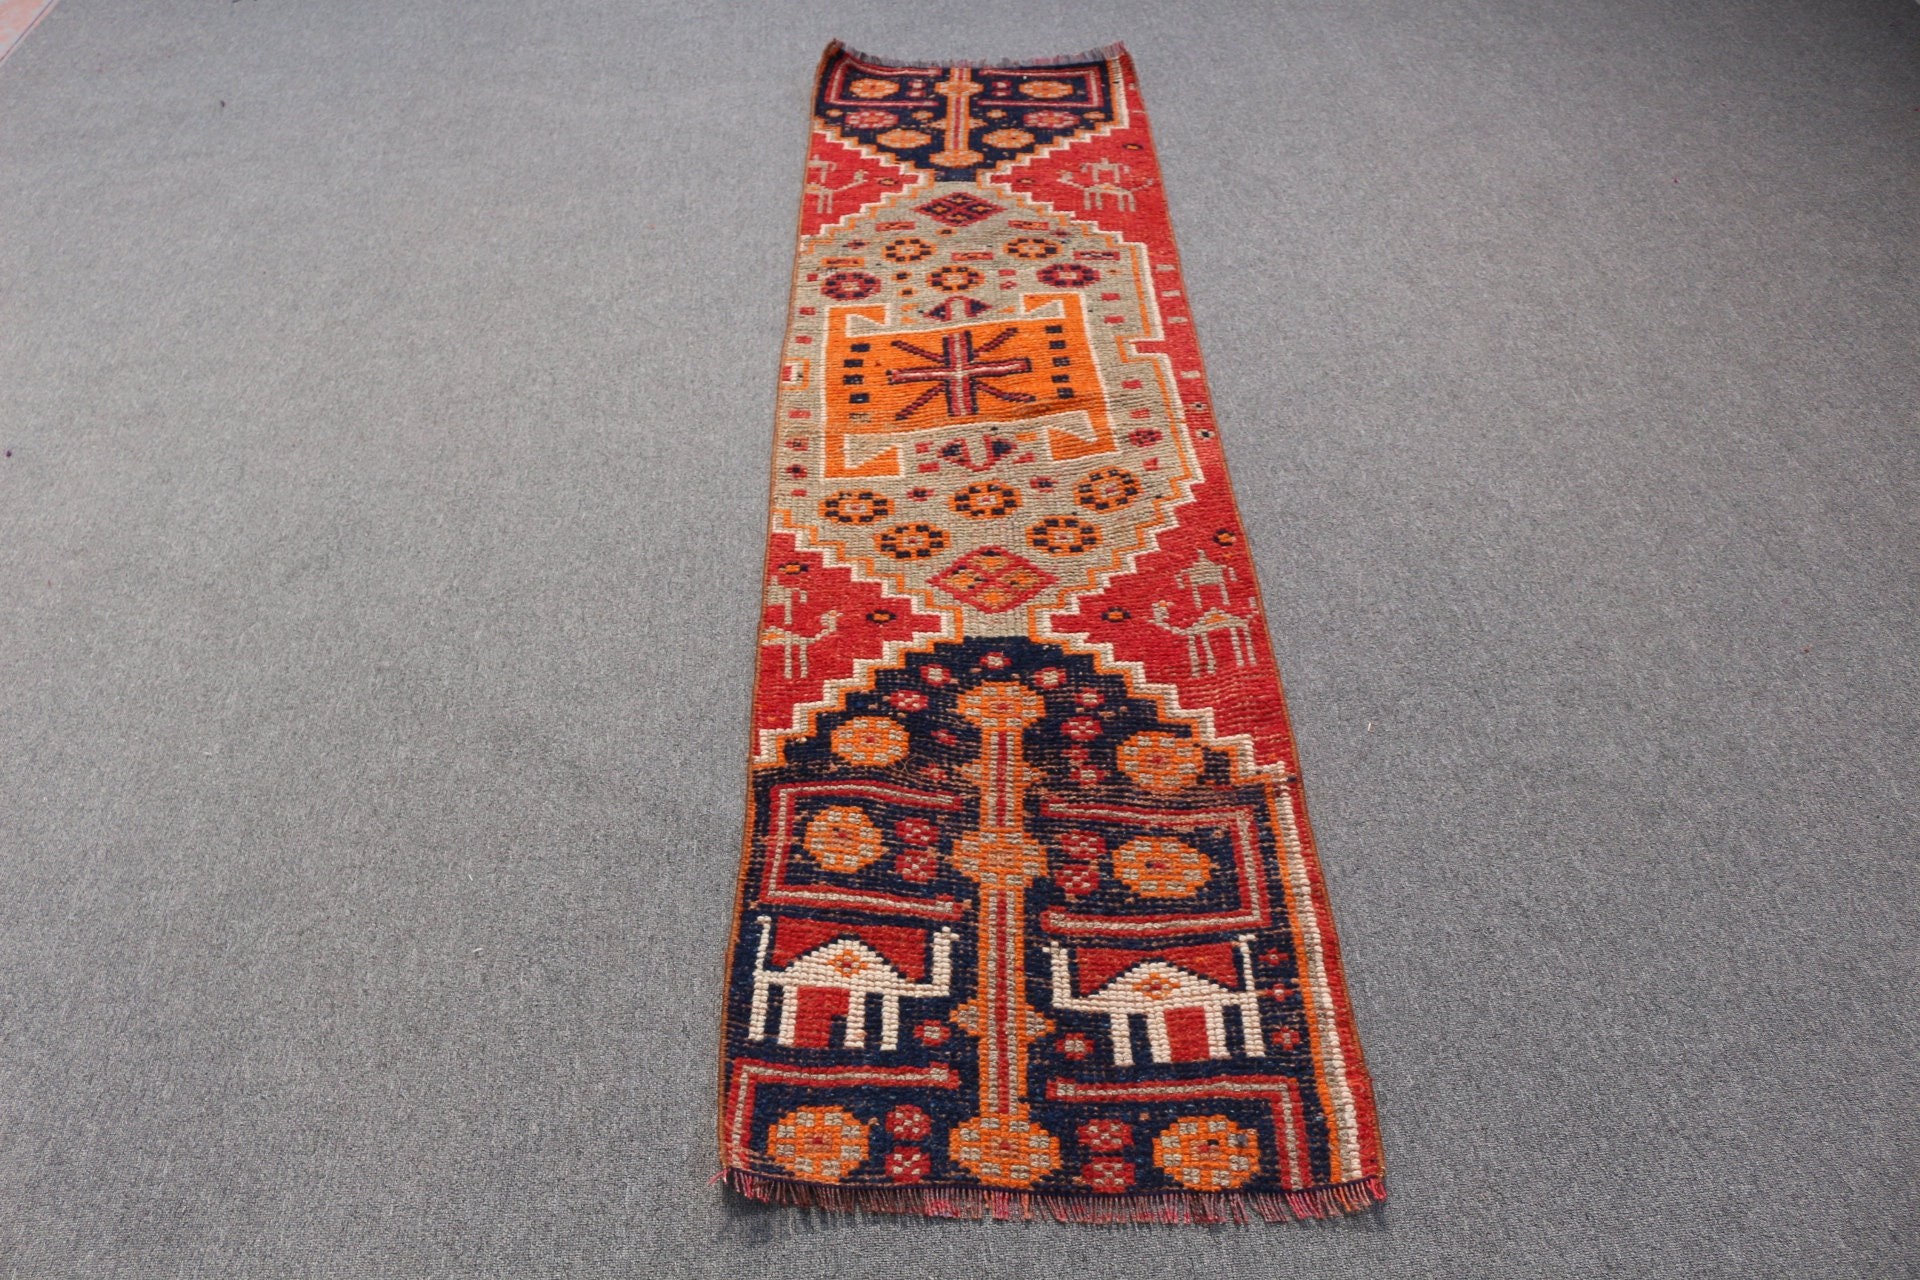 Rugs for Stair, Red Kitchen Rug, 2x7.3 ft Runner Rug, Home Decor Rug, Vintage Decor Rug, Anatolian Rug, Old Rug, Turkish Rugs, Vintage Rugs